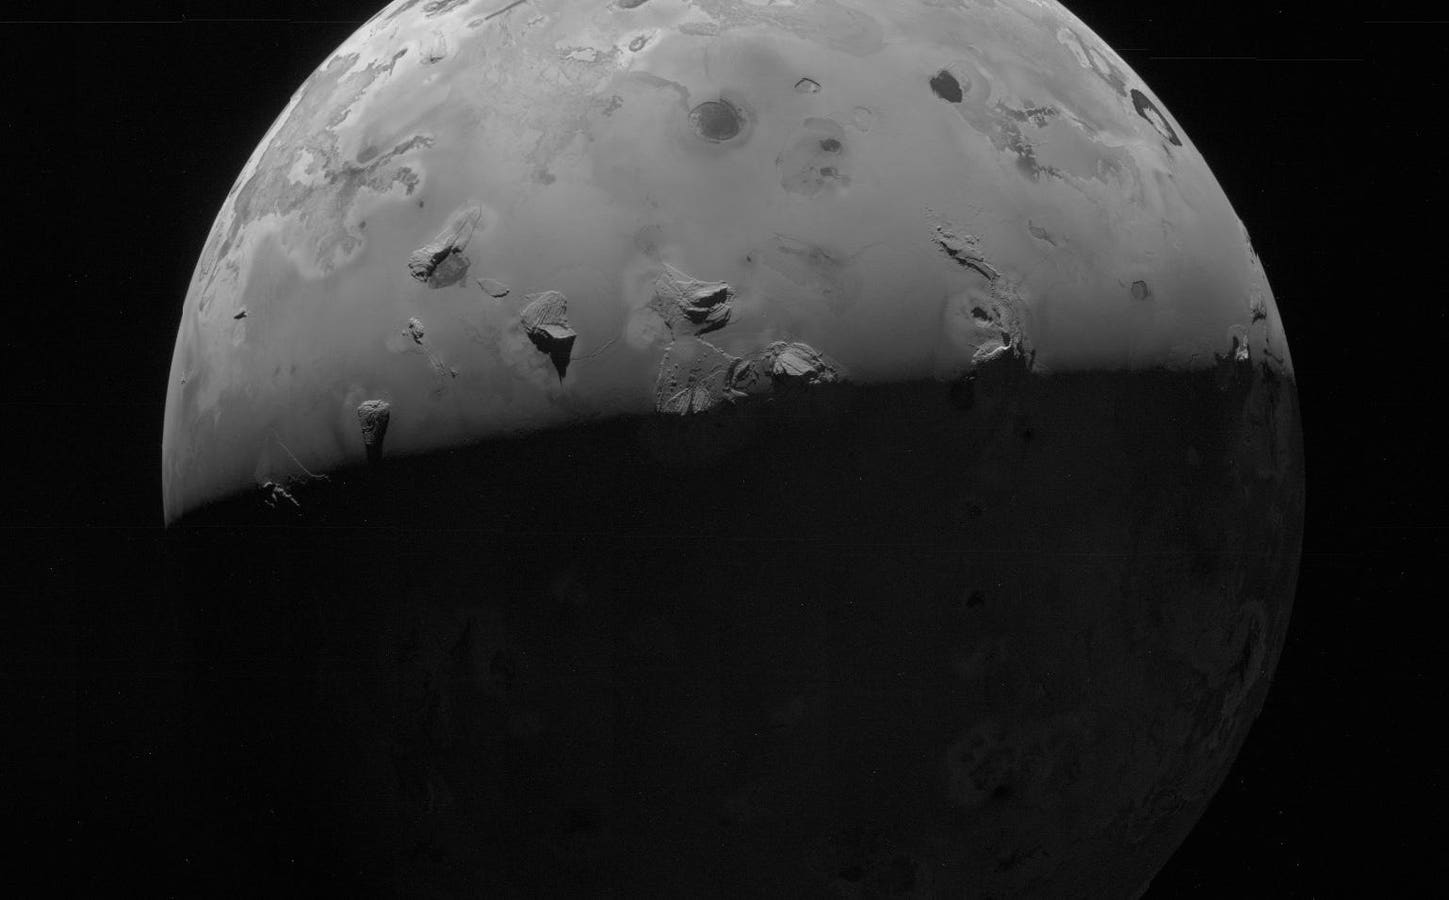 A NASA Spacecraft Just Had A Close Encounter With A Volcanic Moon—See The Stunning First Image